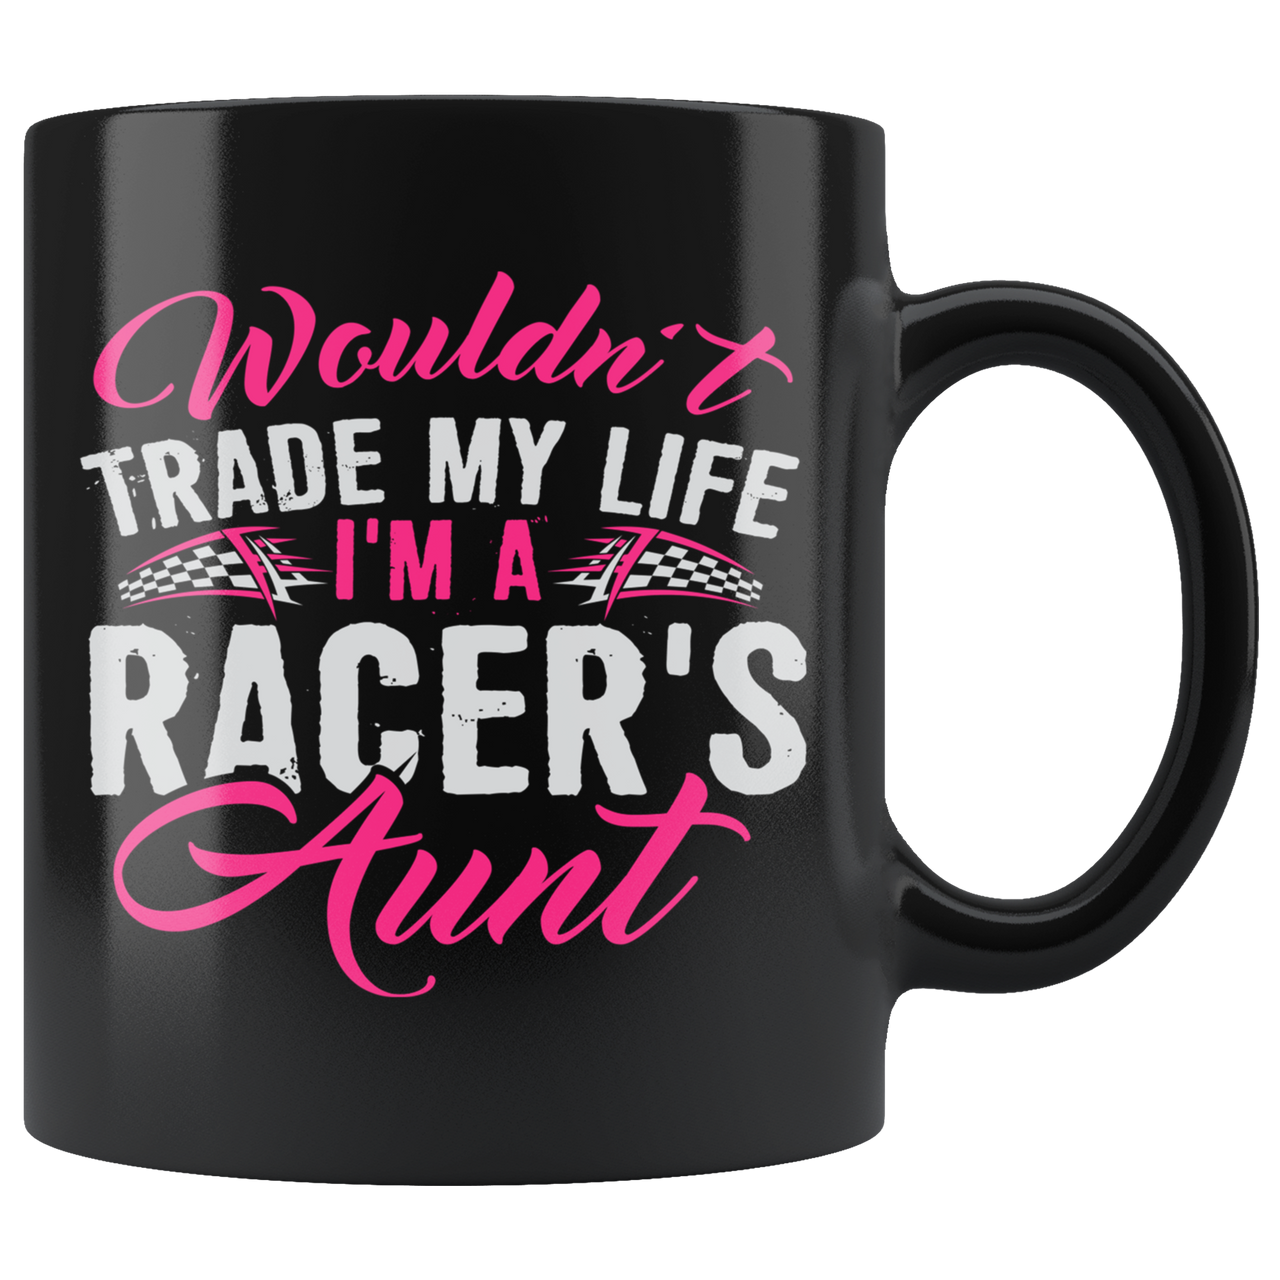 Wouldn't Trade My Life I'm A Racer's Aunt Mug!